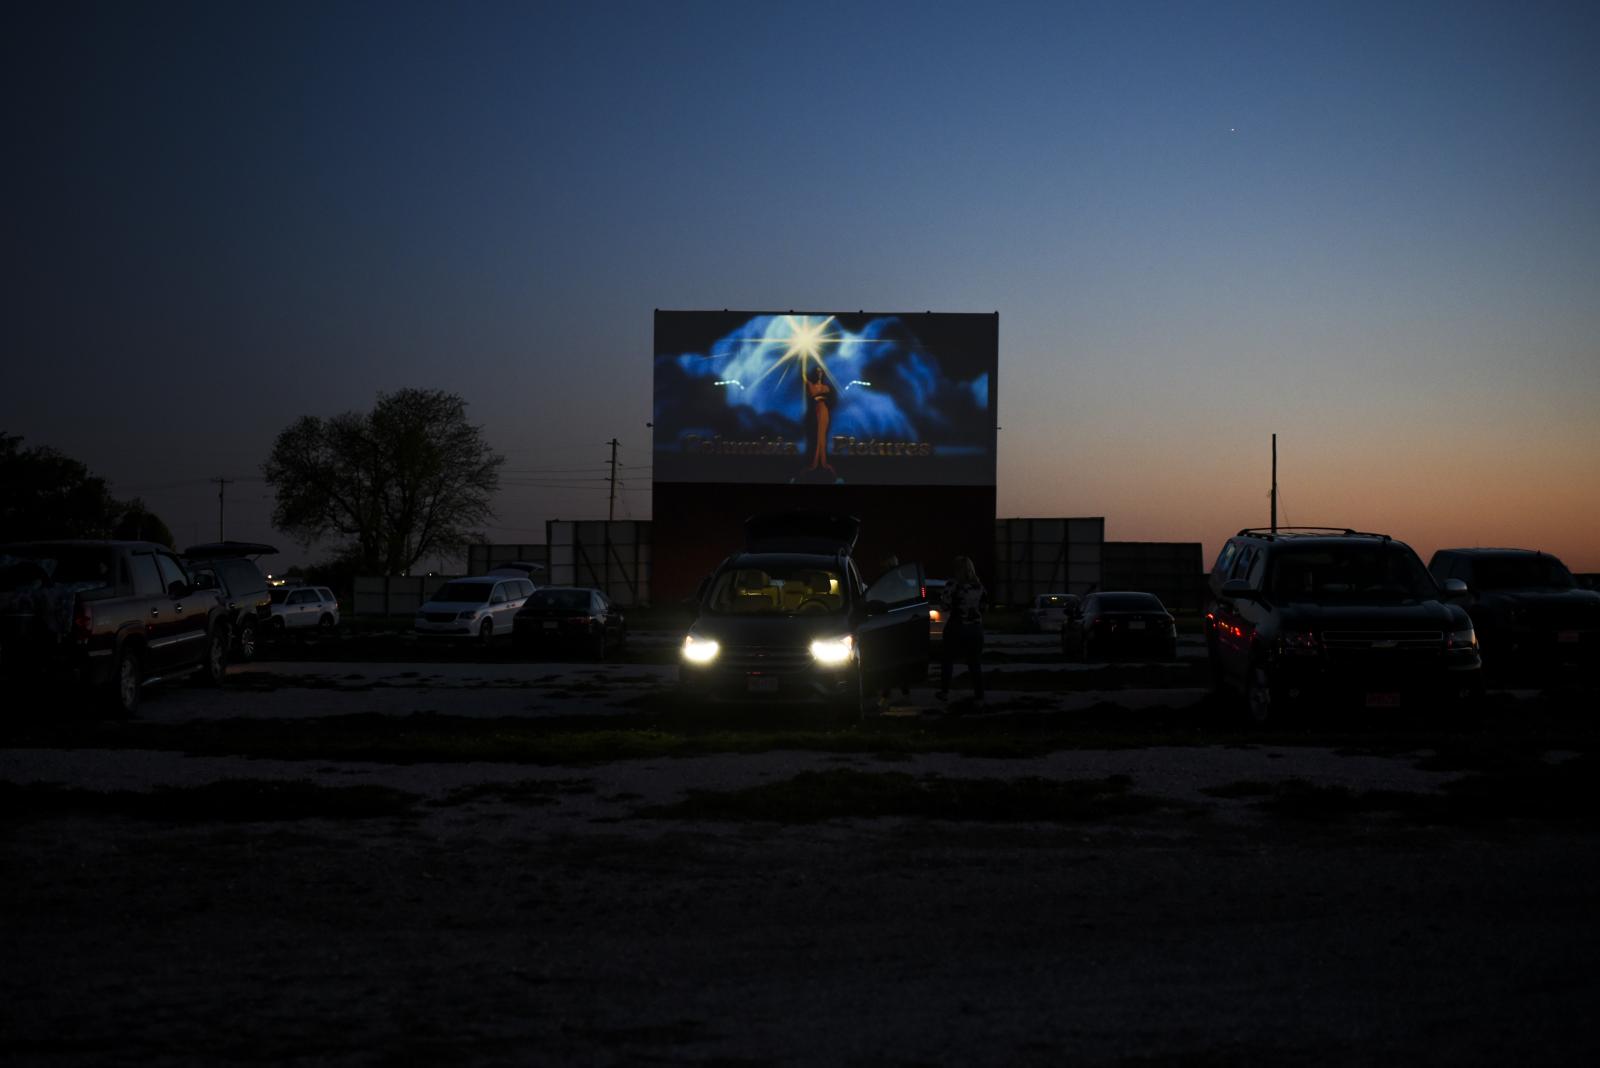 People sit in their cars as the... the ground to watch the movie.